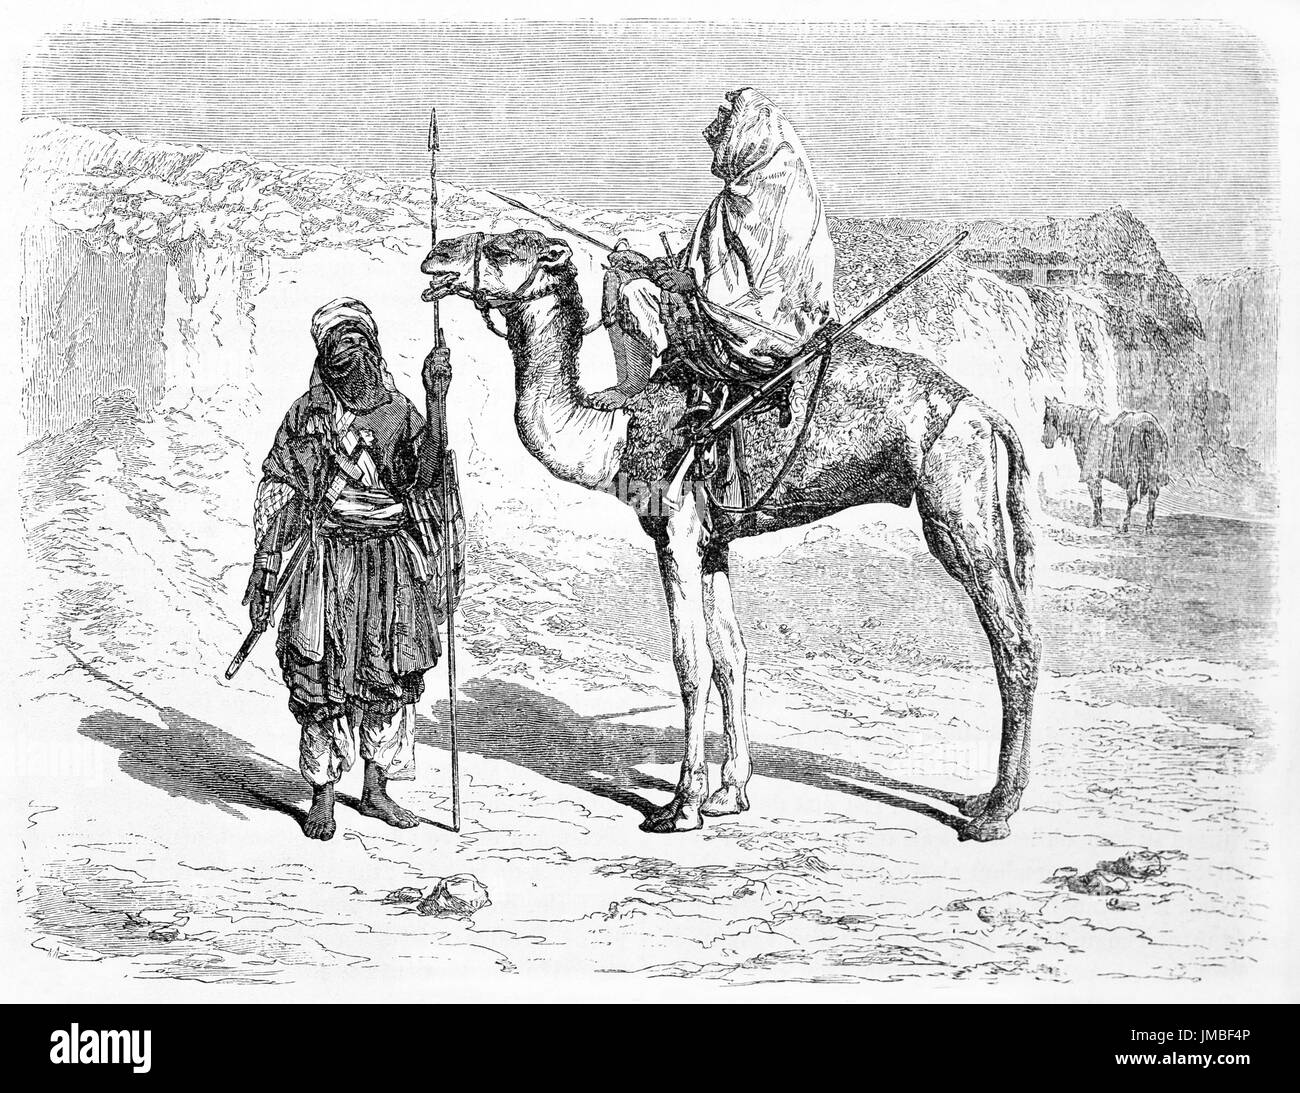 Two Tuareg men outdoor in the warm desert in their typical costumes. One on camel back. Sahara, Algeria. Etching style art by Hadamard 1861 Stock Photo